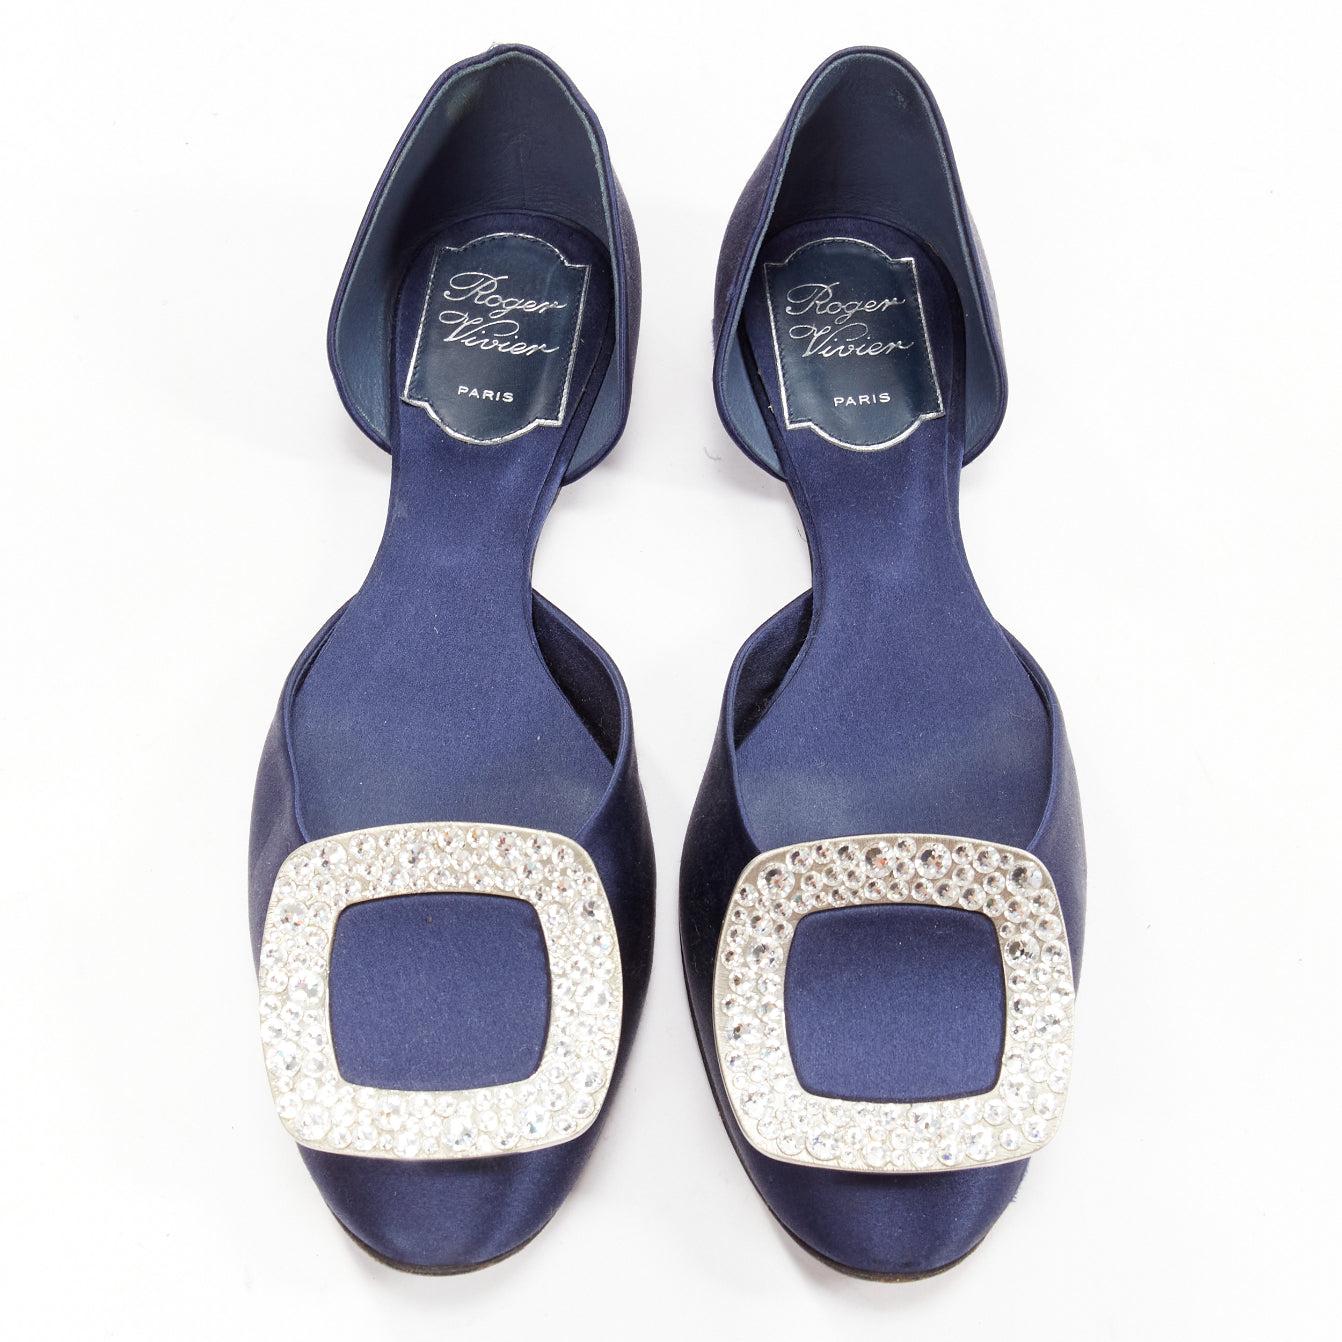 ROGER VIVIER Chips Strass navy satin crystal square buckles flat shoes EU35
Reference: YIKK/A00045
Brand: Roger Vivier
Model: Chips Strass
Material: Satin, Metal
Color: Navy, Silver
Pattern: Crystals
Closure: Slip On
Lining: Navy Fabric
Made in: